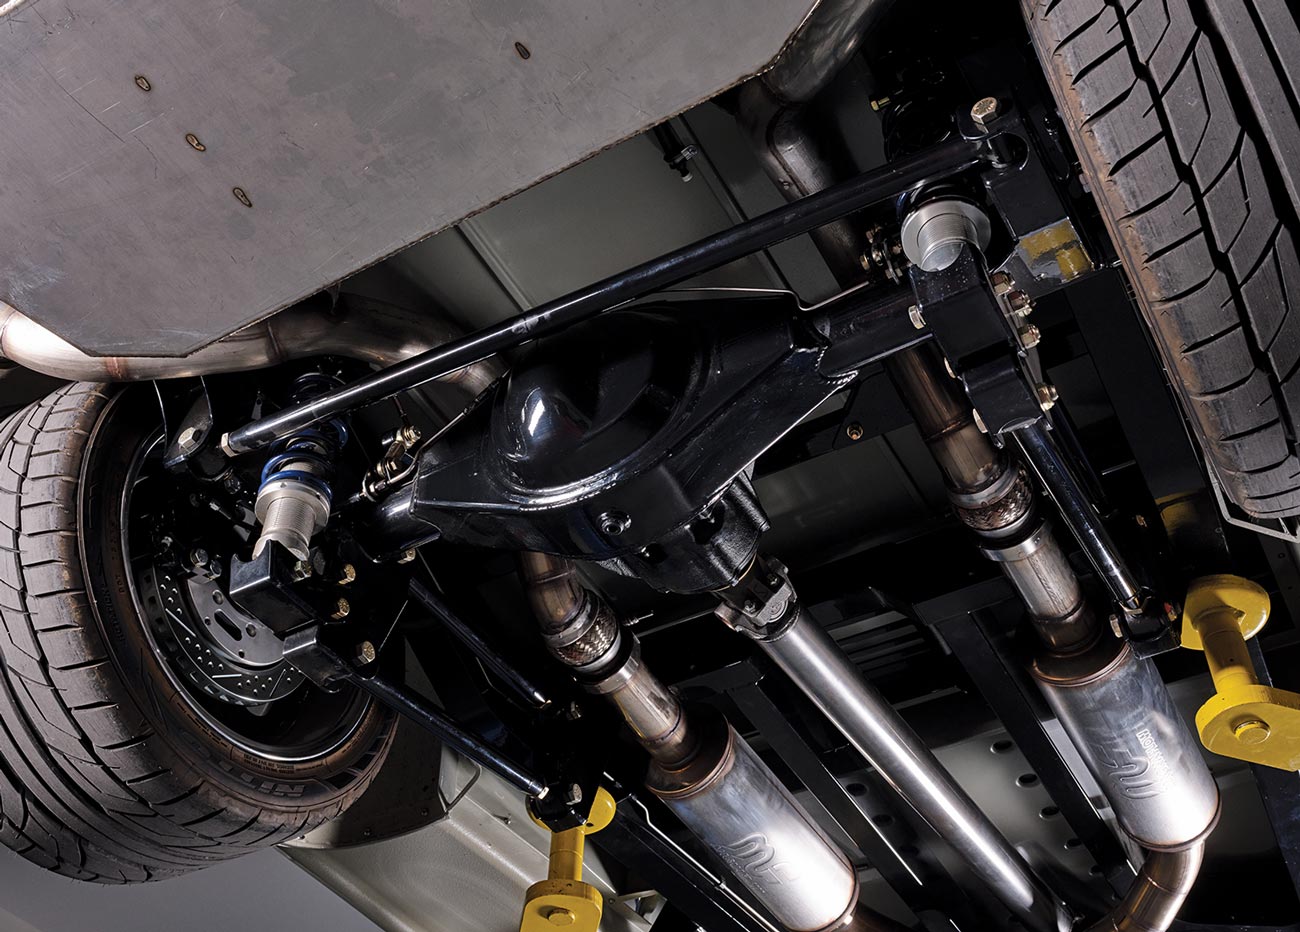 '37 Chevy pickup's rear undercarriage